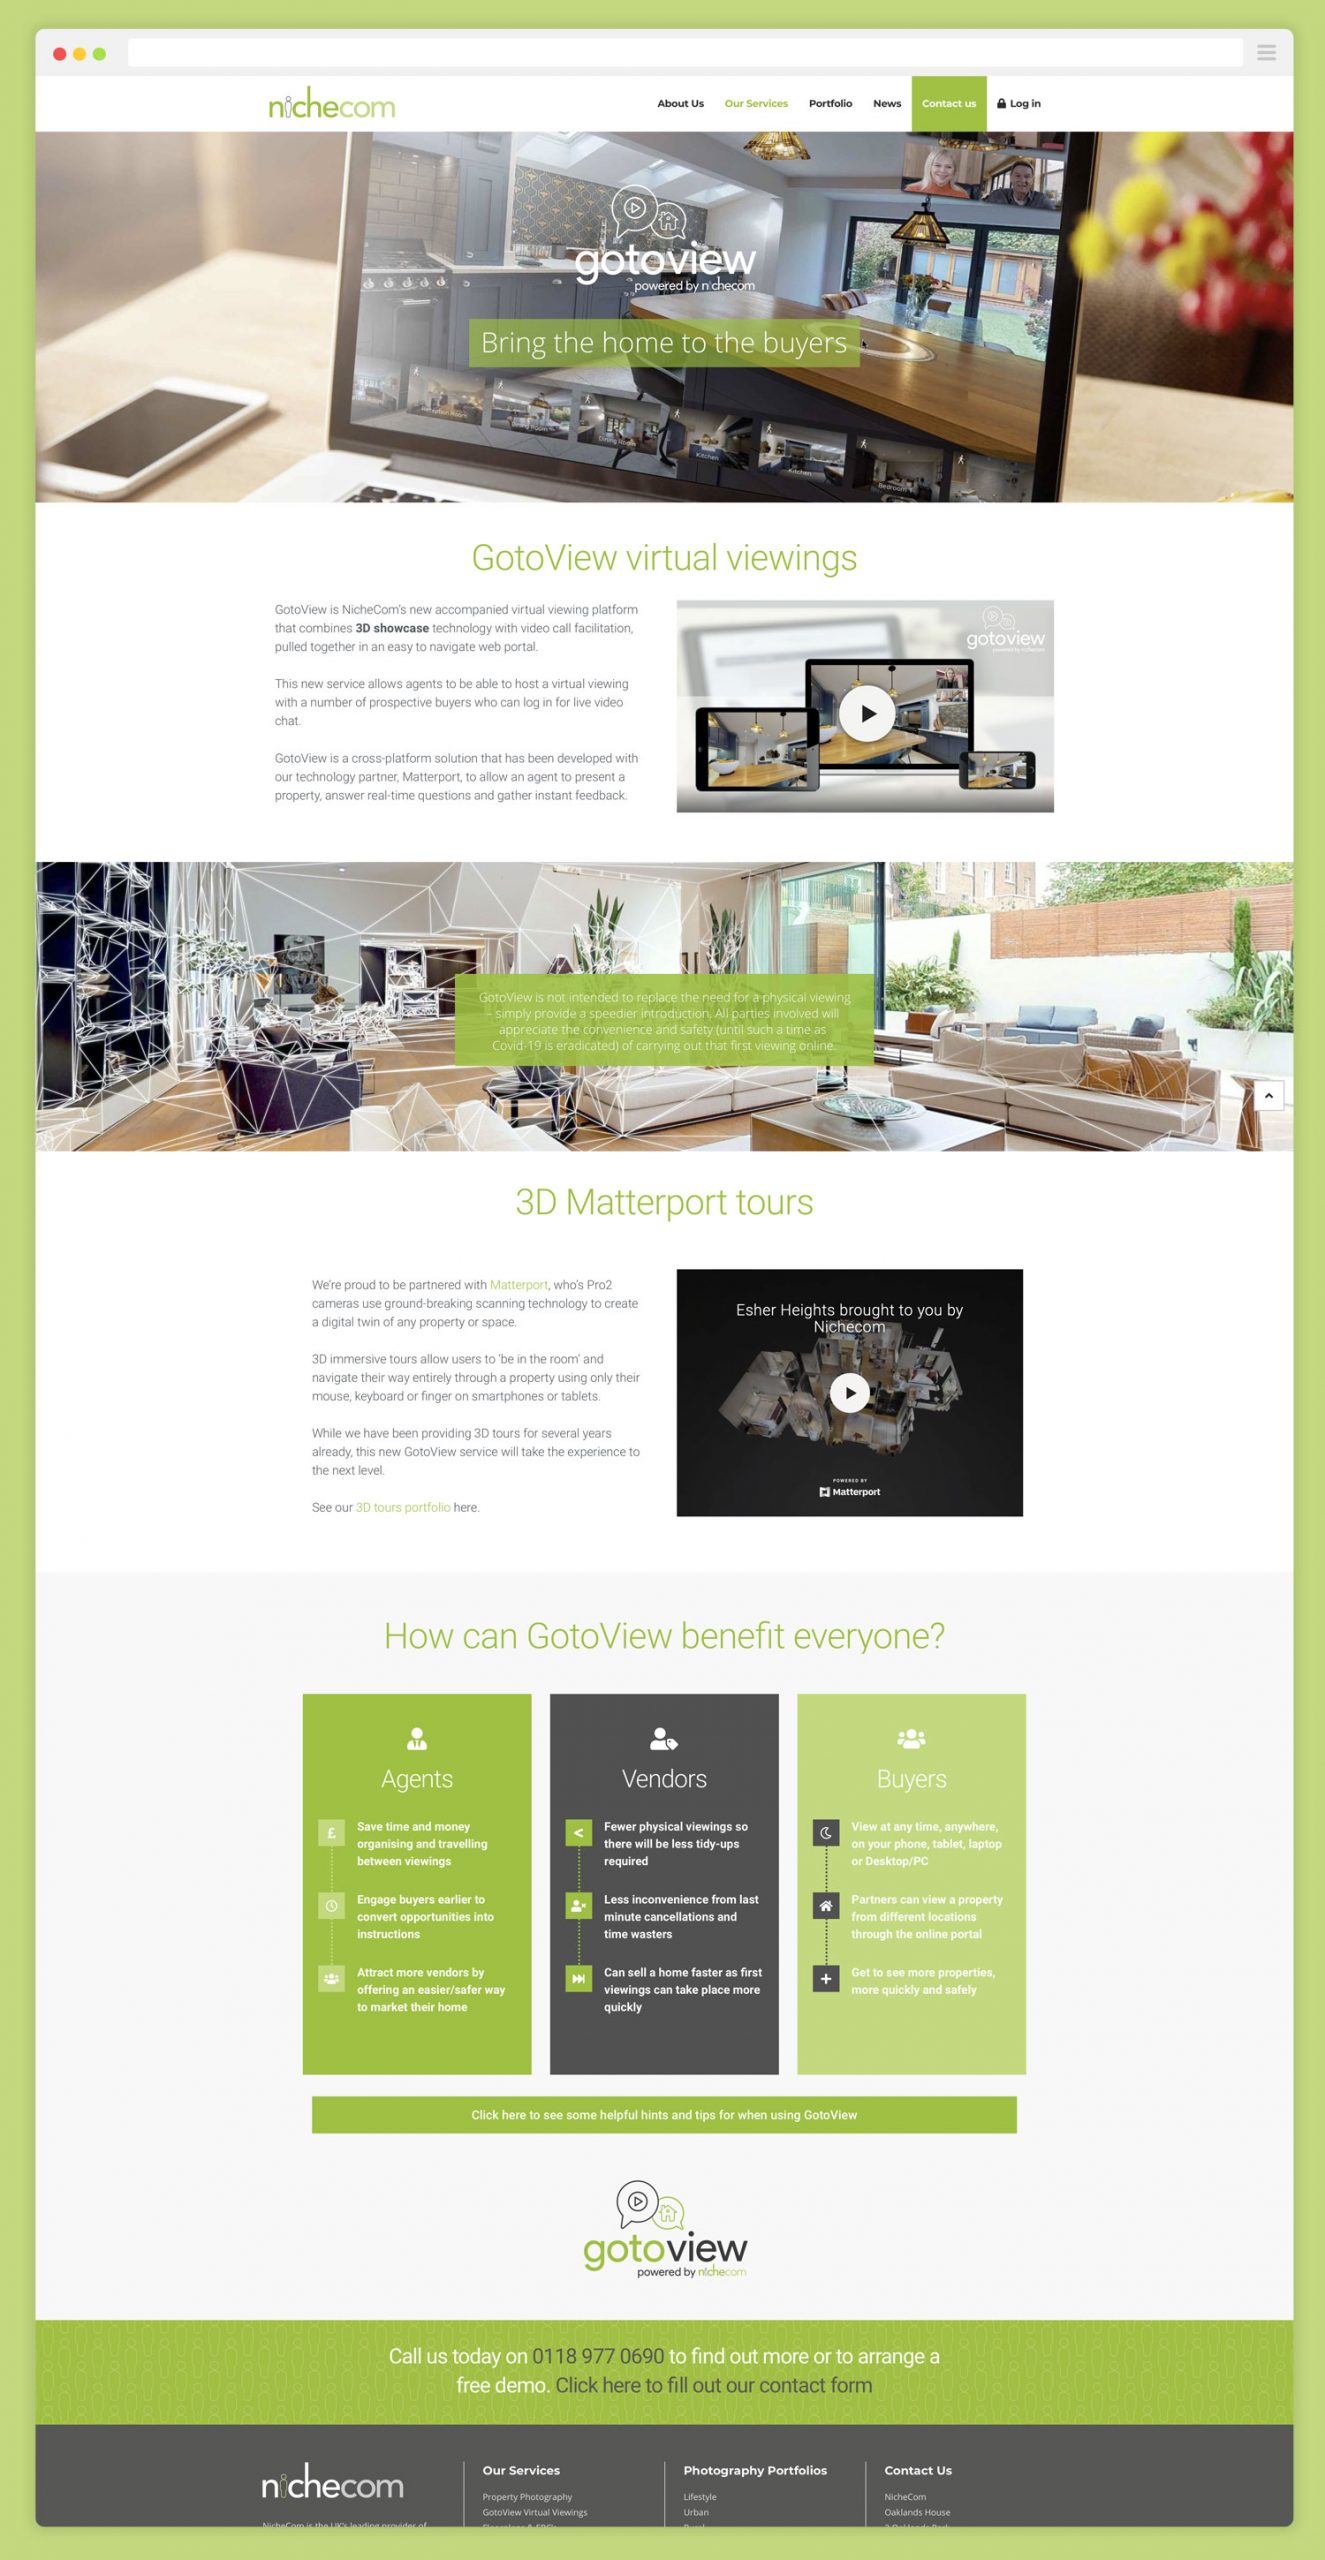 GotoView Branding & Webpage for NicheCom | My Name is Dan